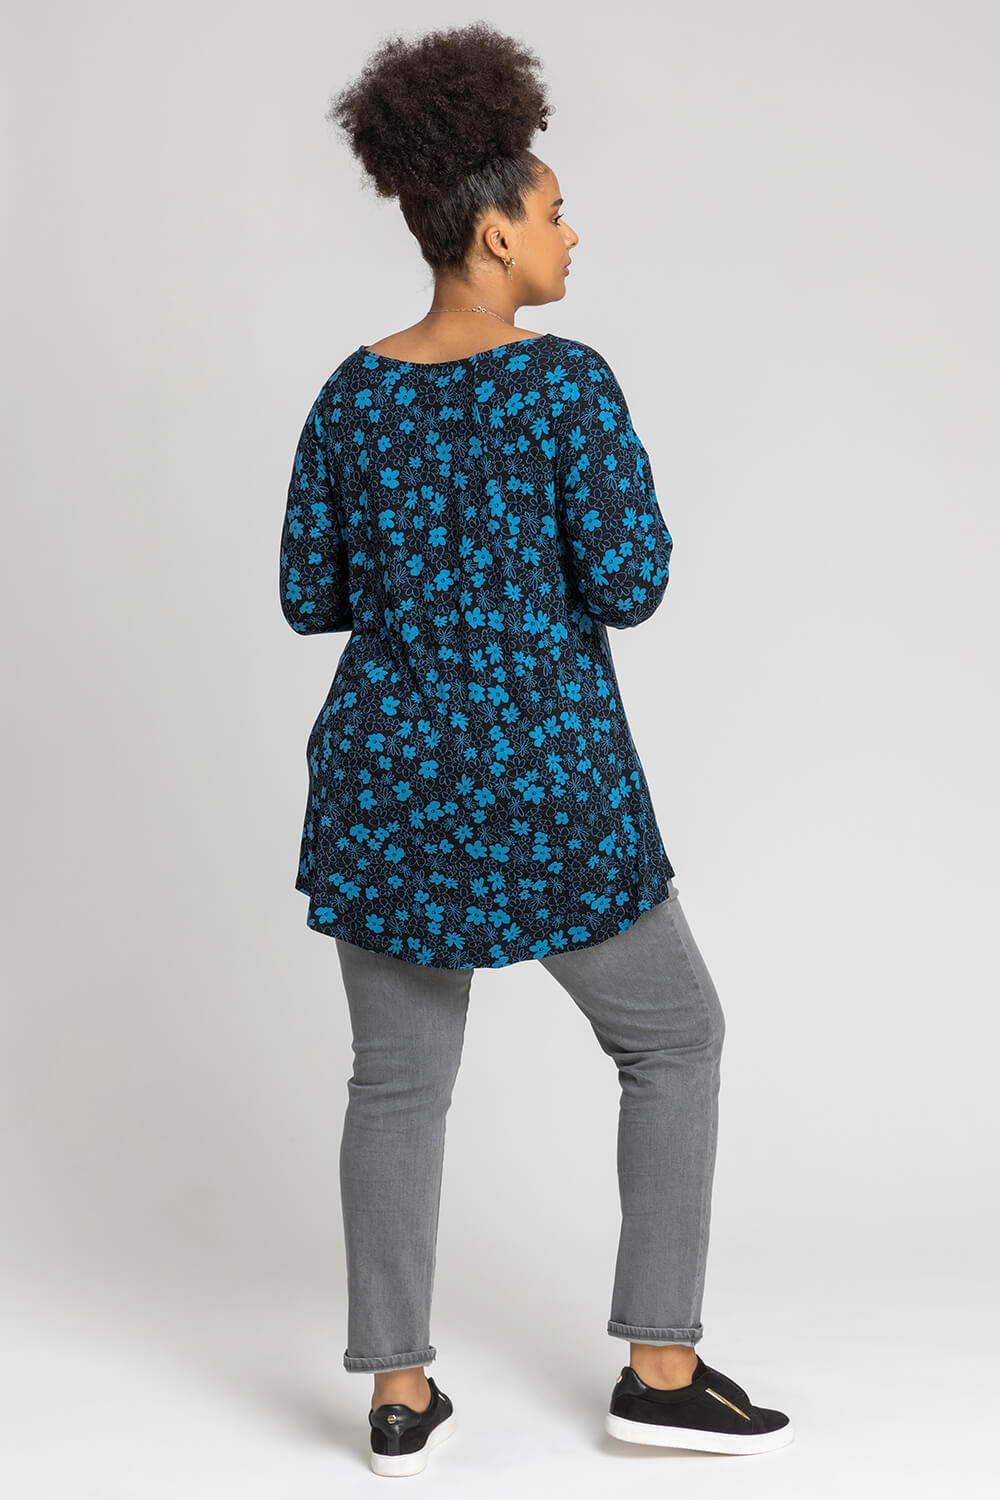 Royal Blue Curve Contrast Floral Print Jersey Top, Image 2 of 4